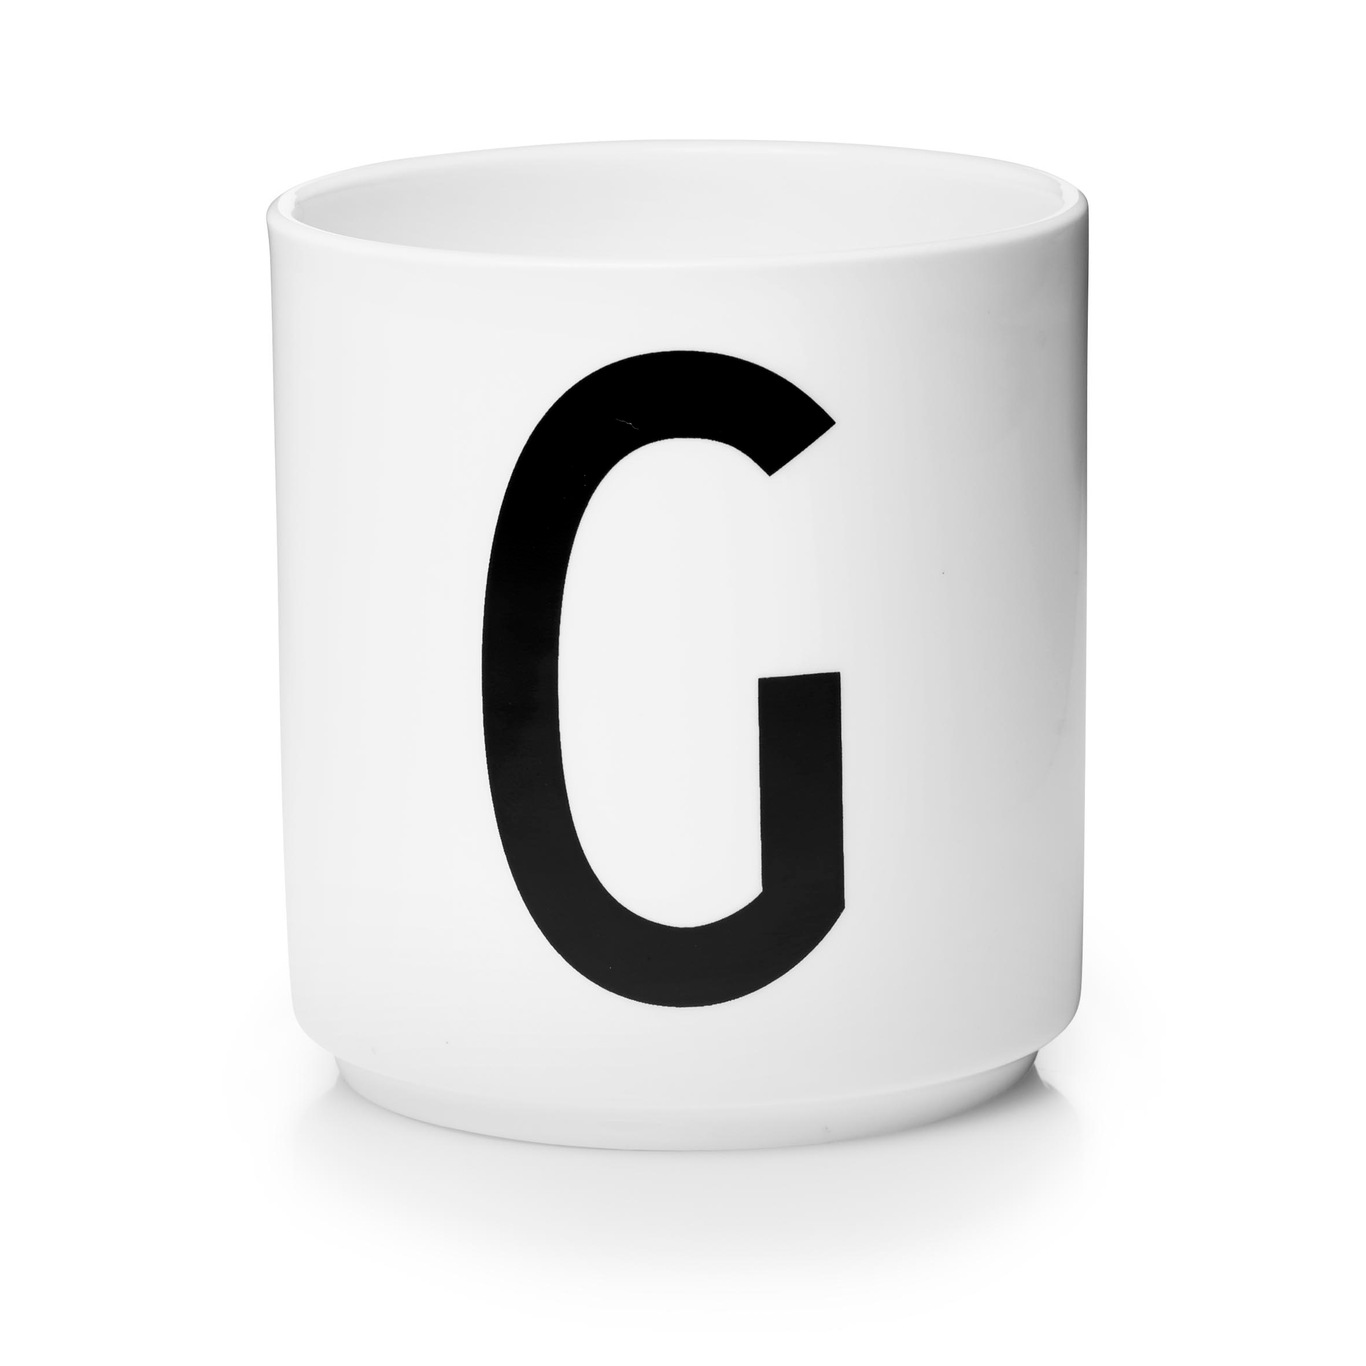 Personal Porcelain Cup White, G